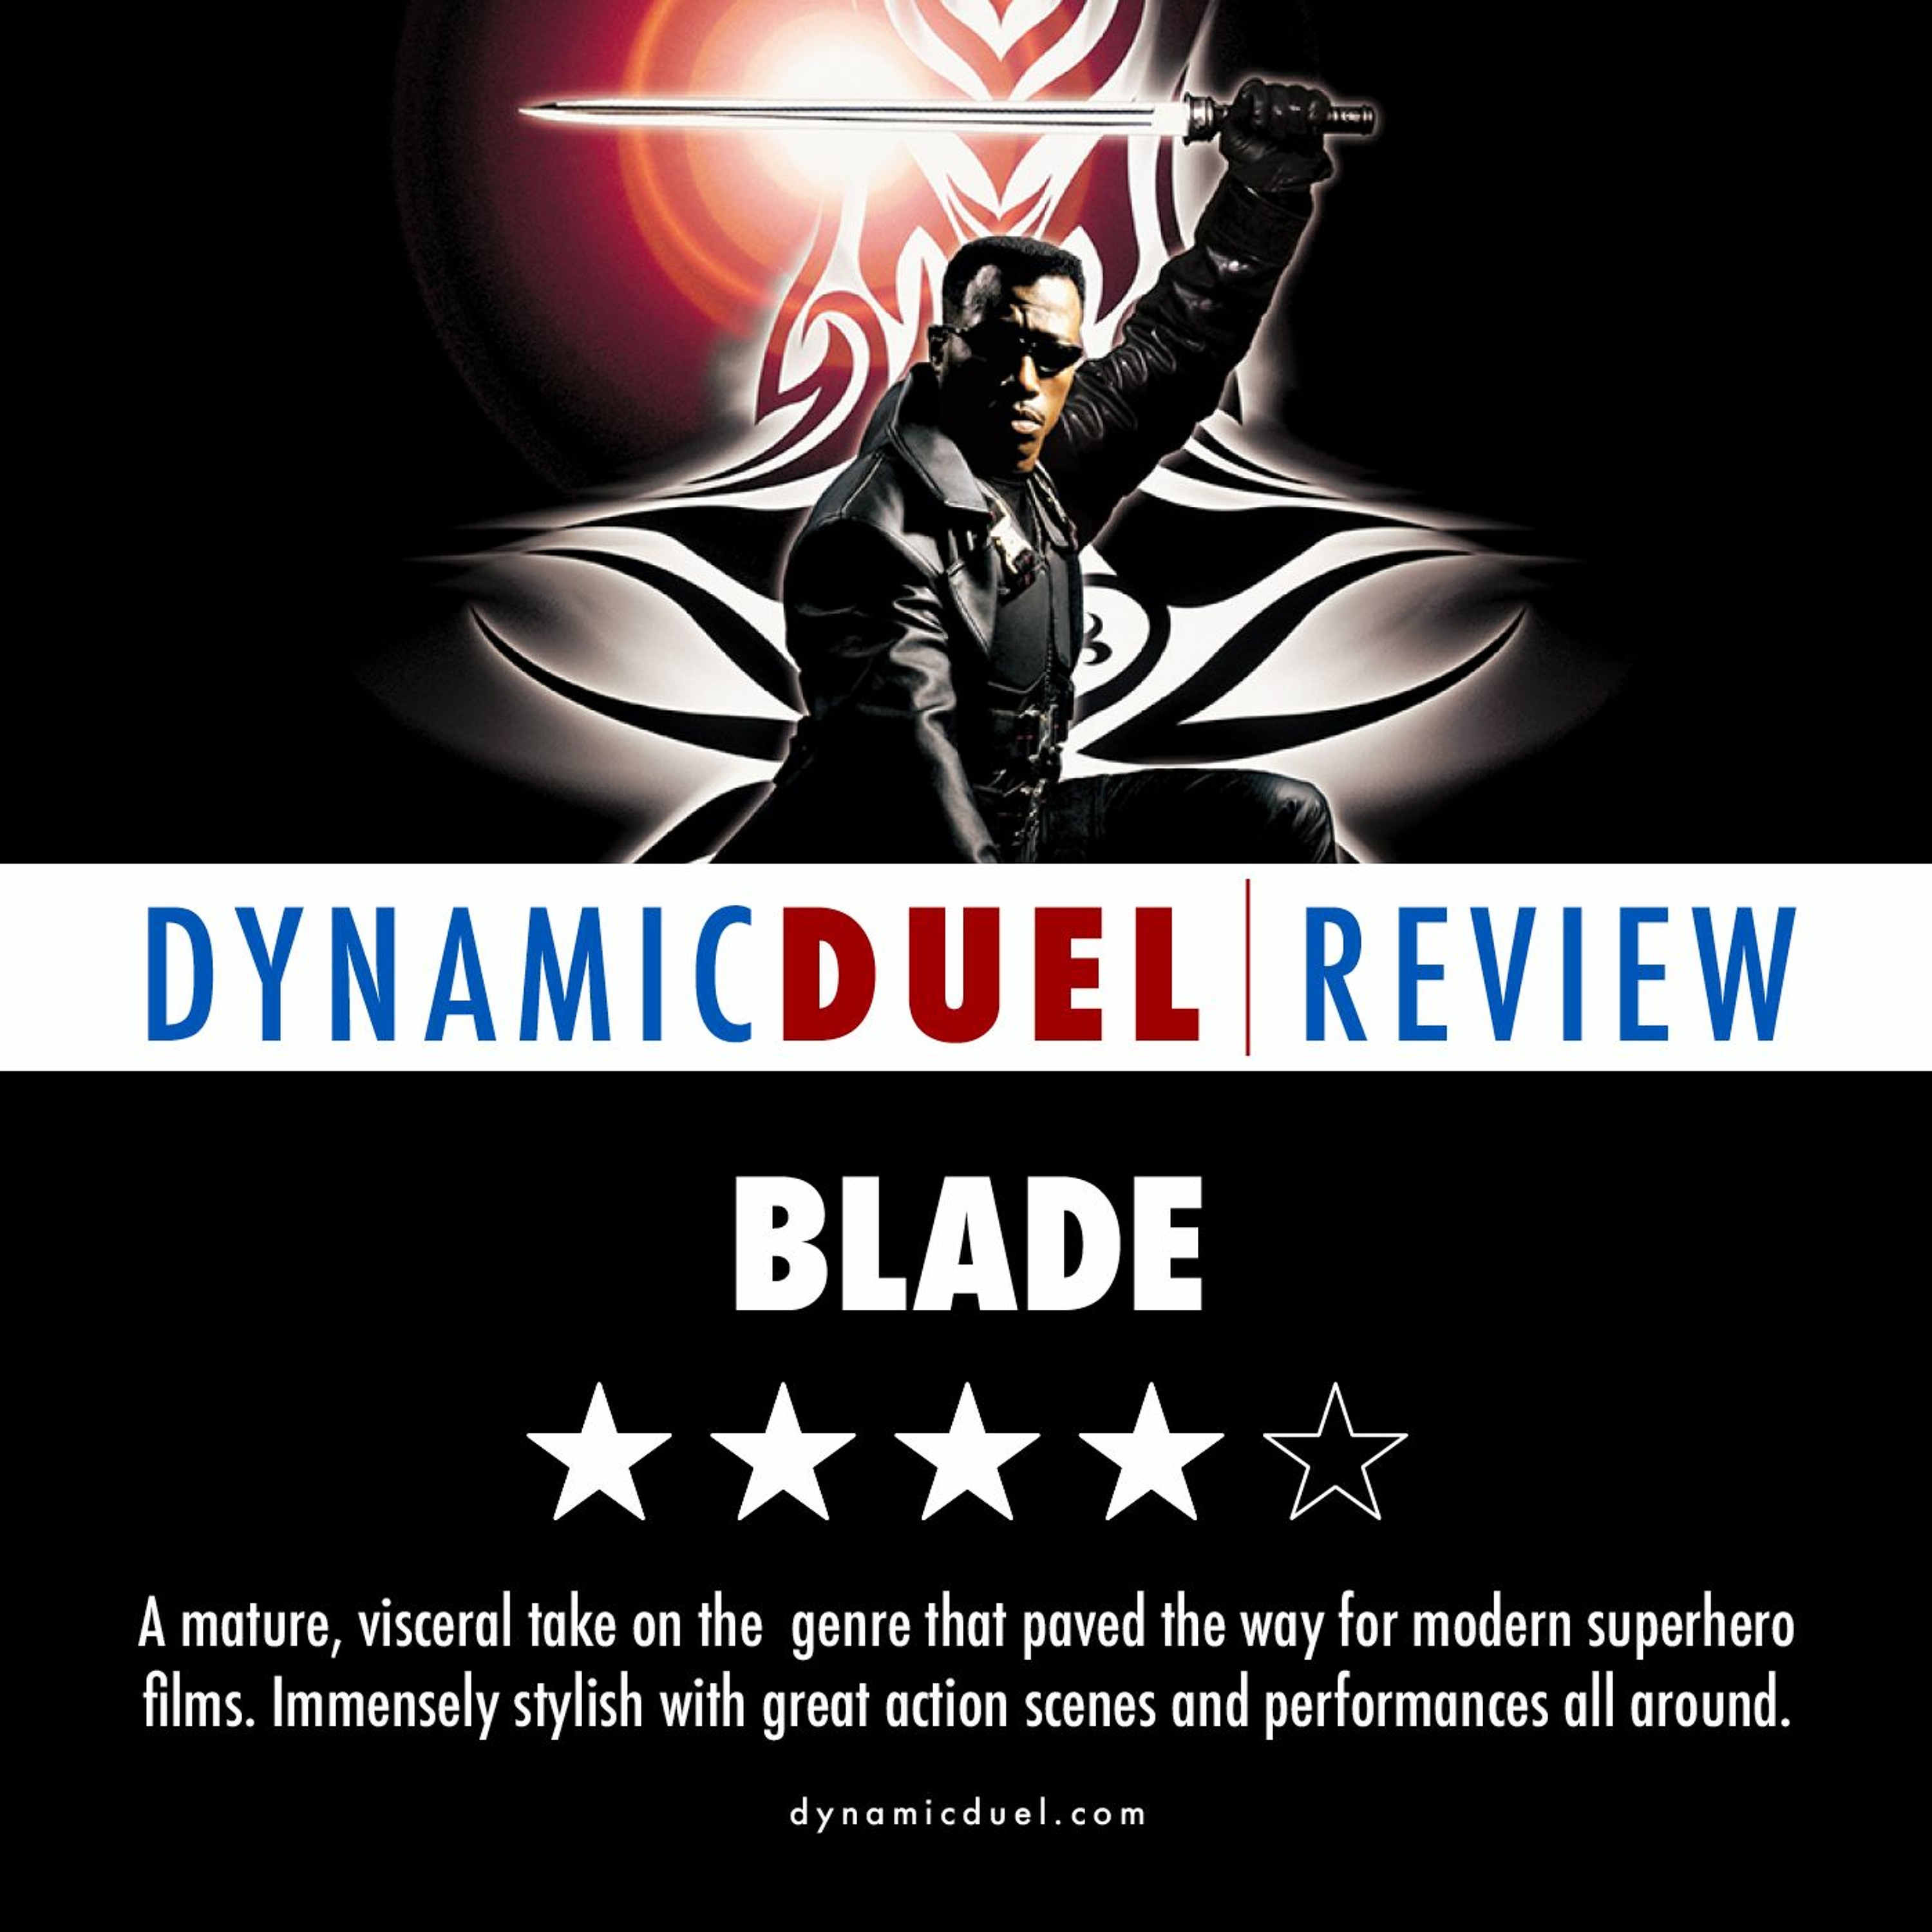 Blade Review Image